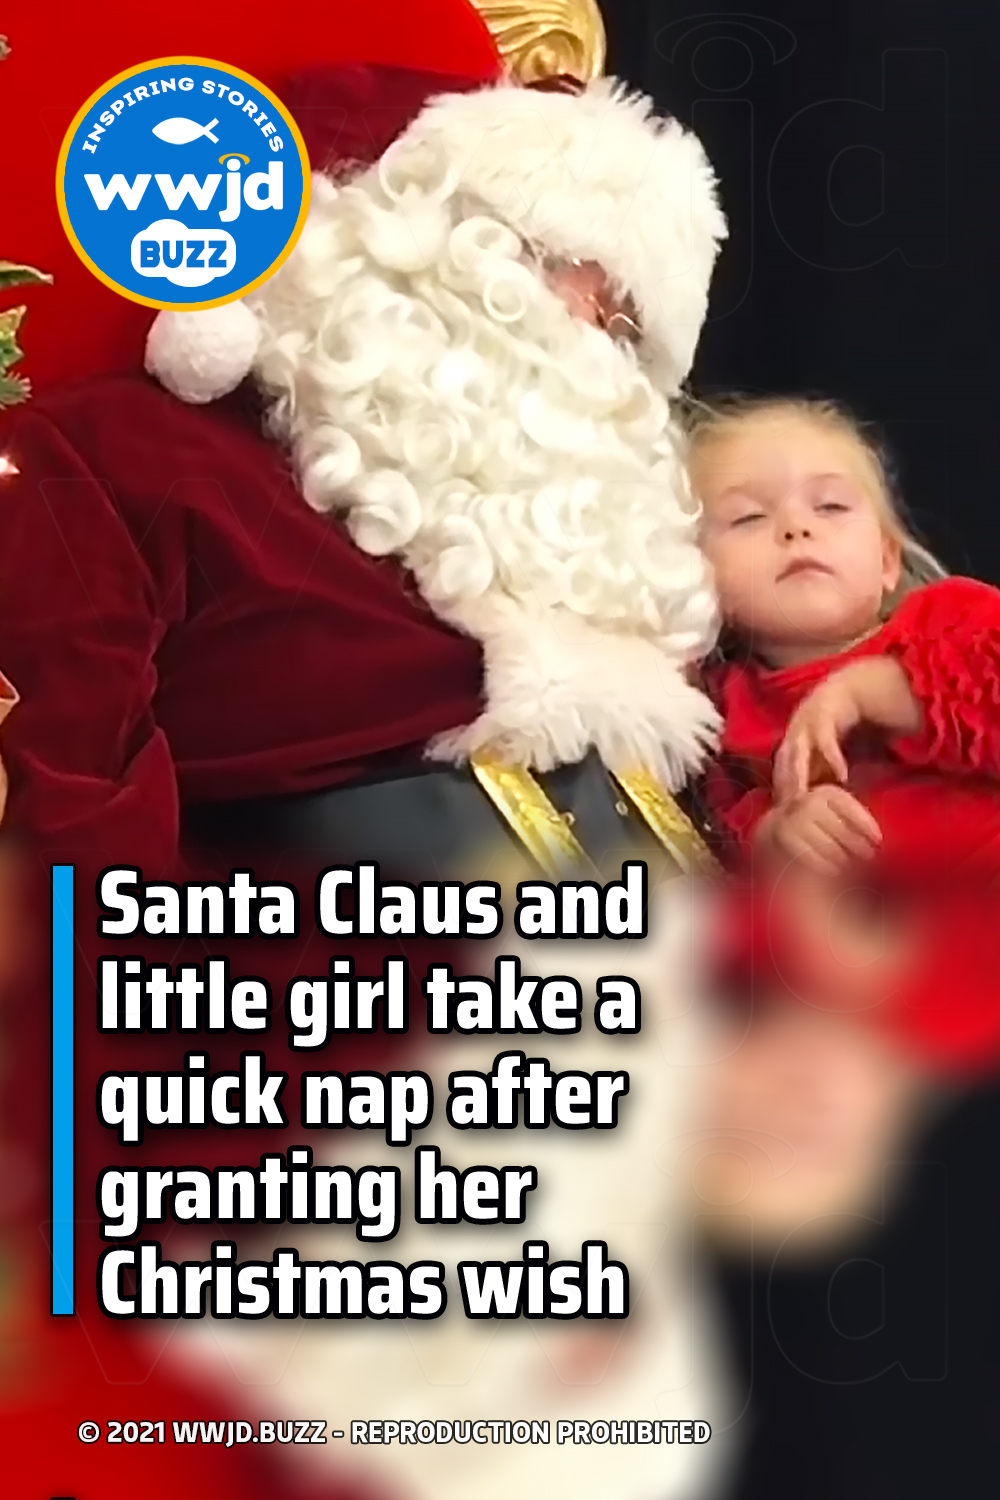 Santa Claus and little girl take a quick nap after granting her Christmas wish